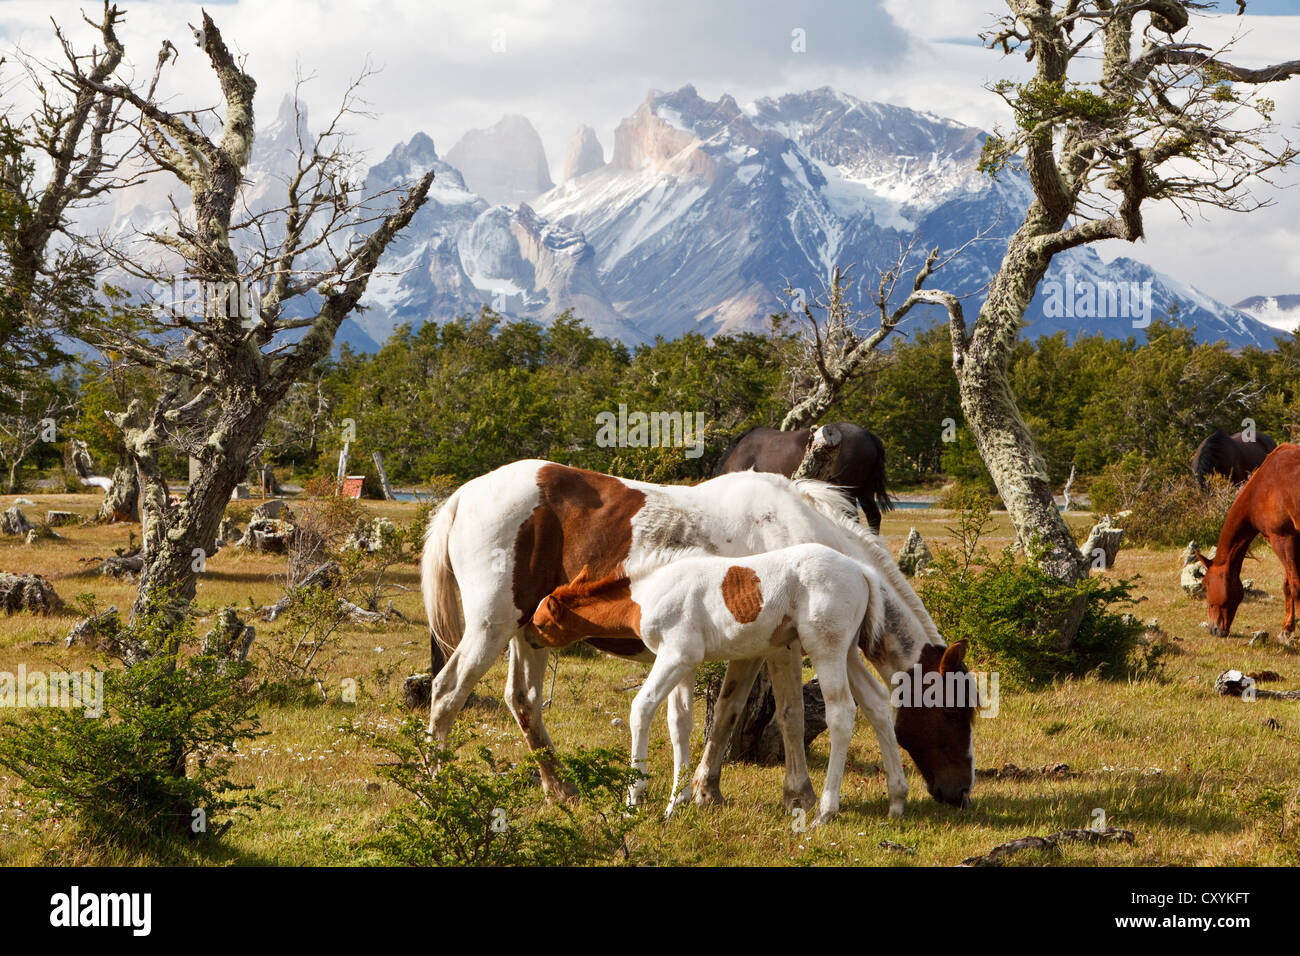 A mare and a foal on a green meadow in front of the Cuernos del Paine granite mountains, Torres del Paine National Park, Stock Photo